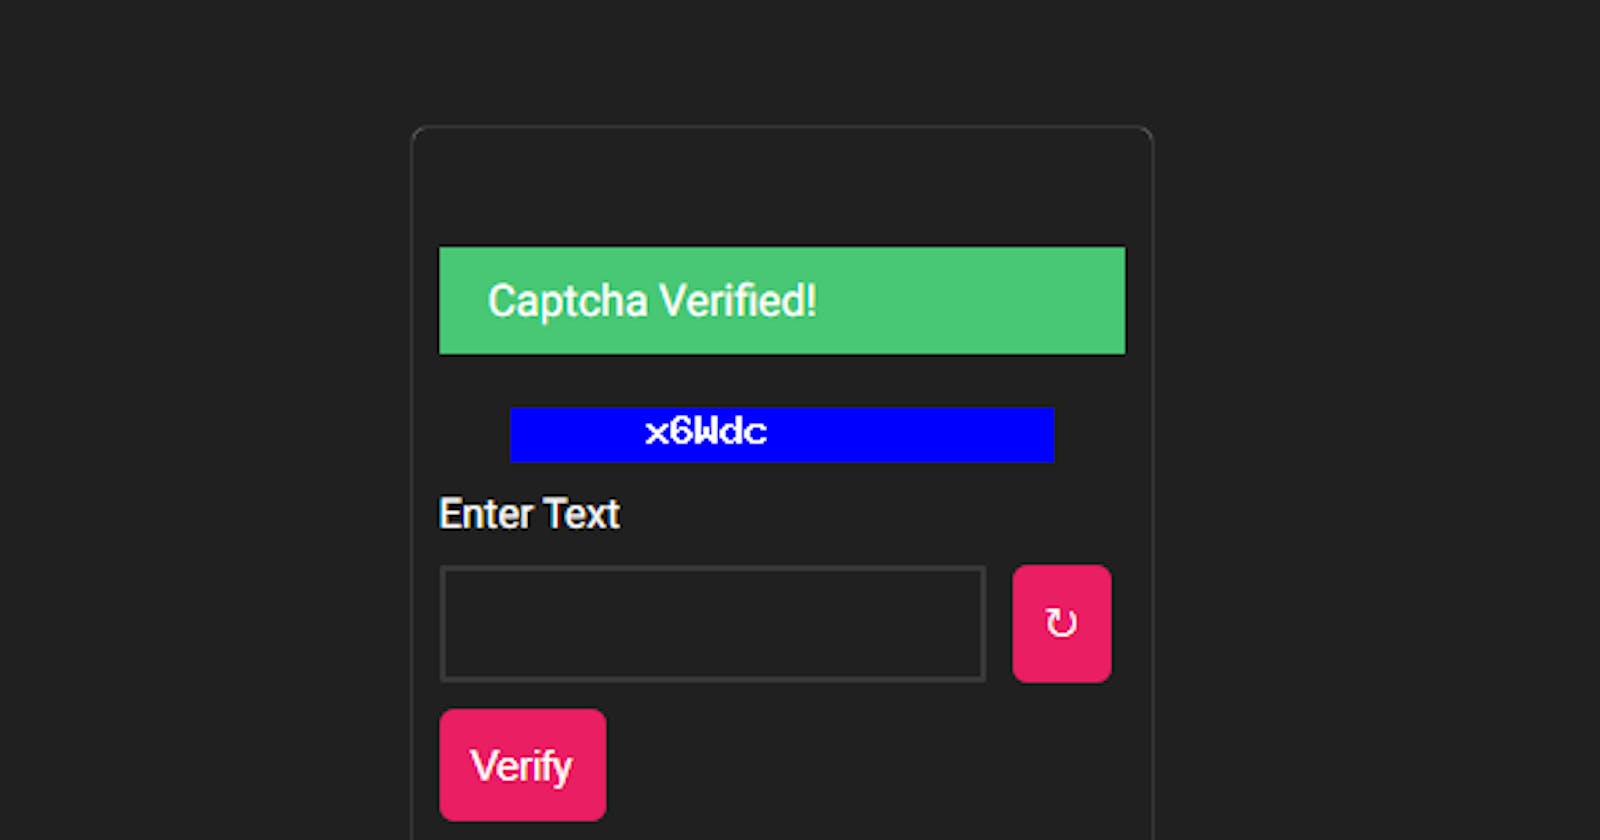 Create A Simple Image Captcha using PHP